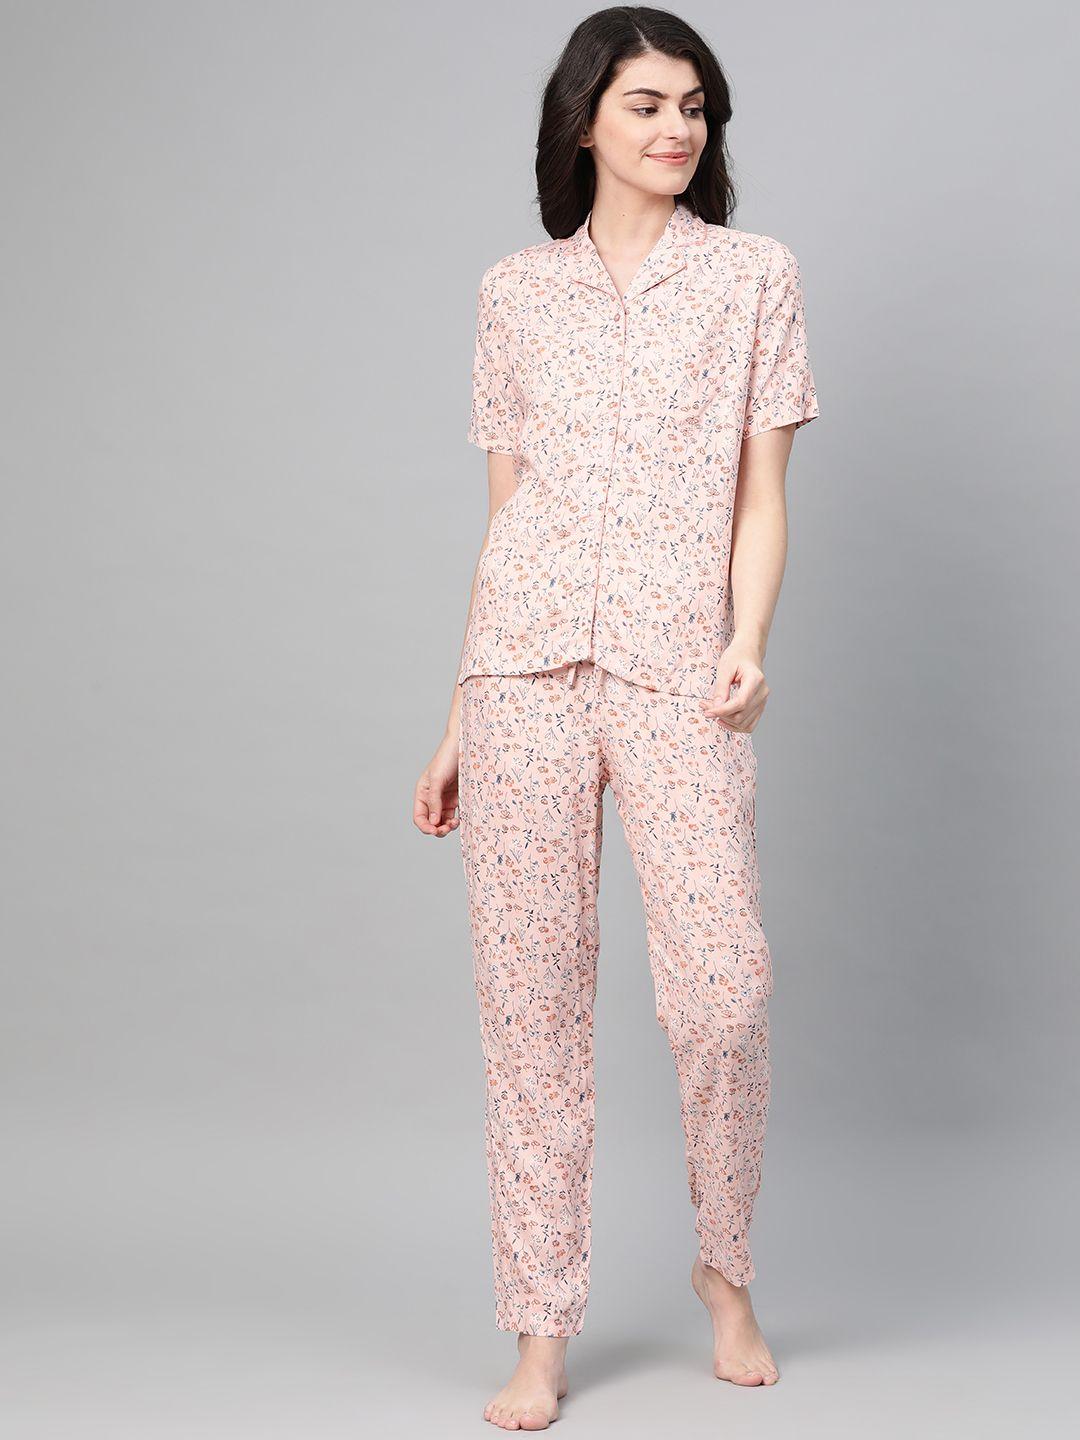 drape in vogue women peach-coloured & off-white printed nightsuit